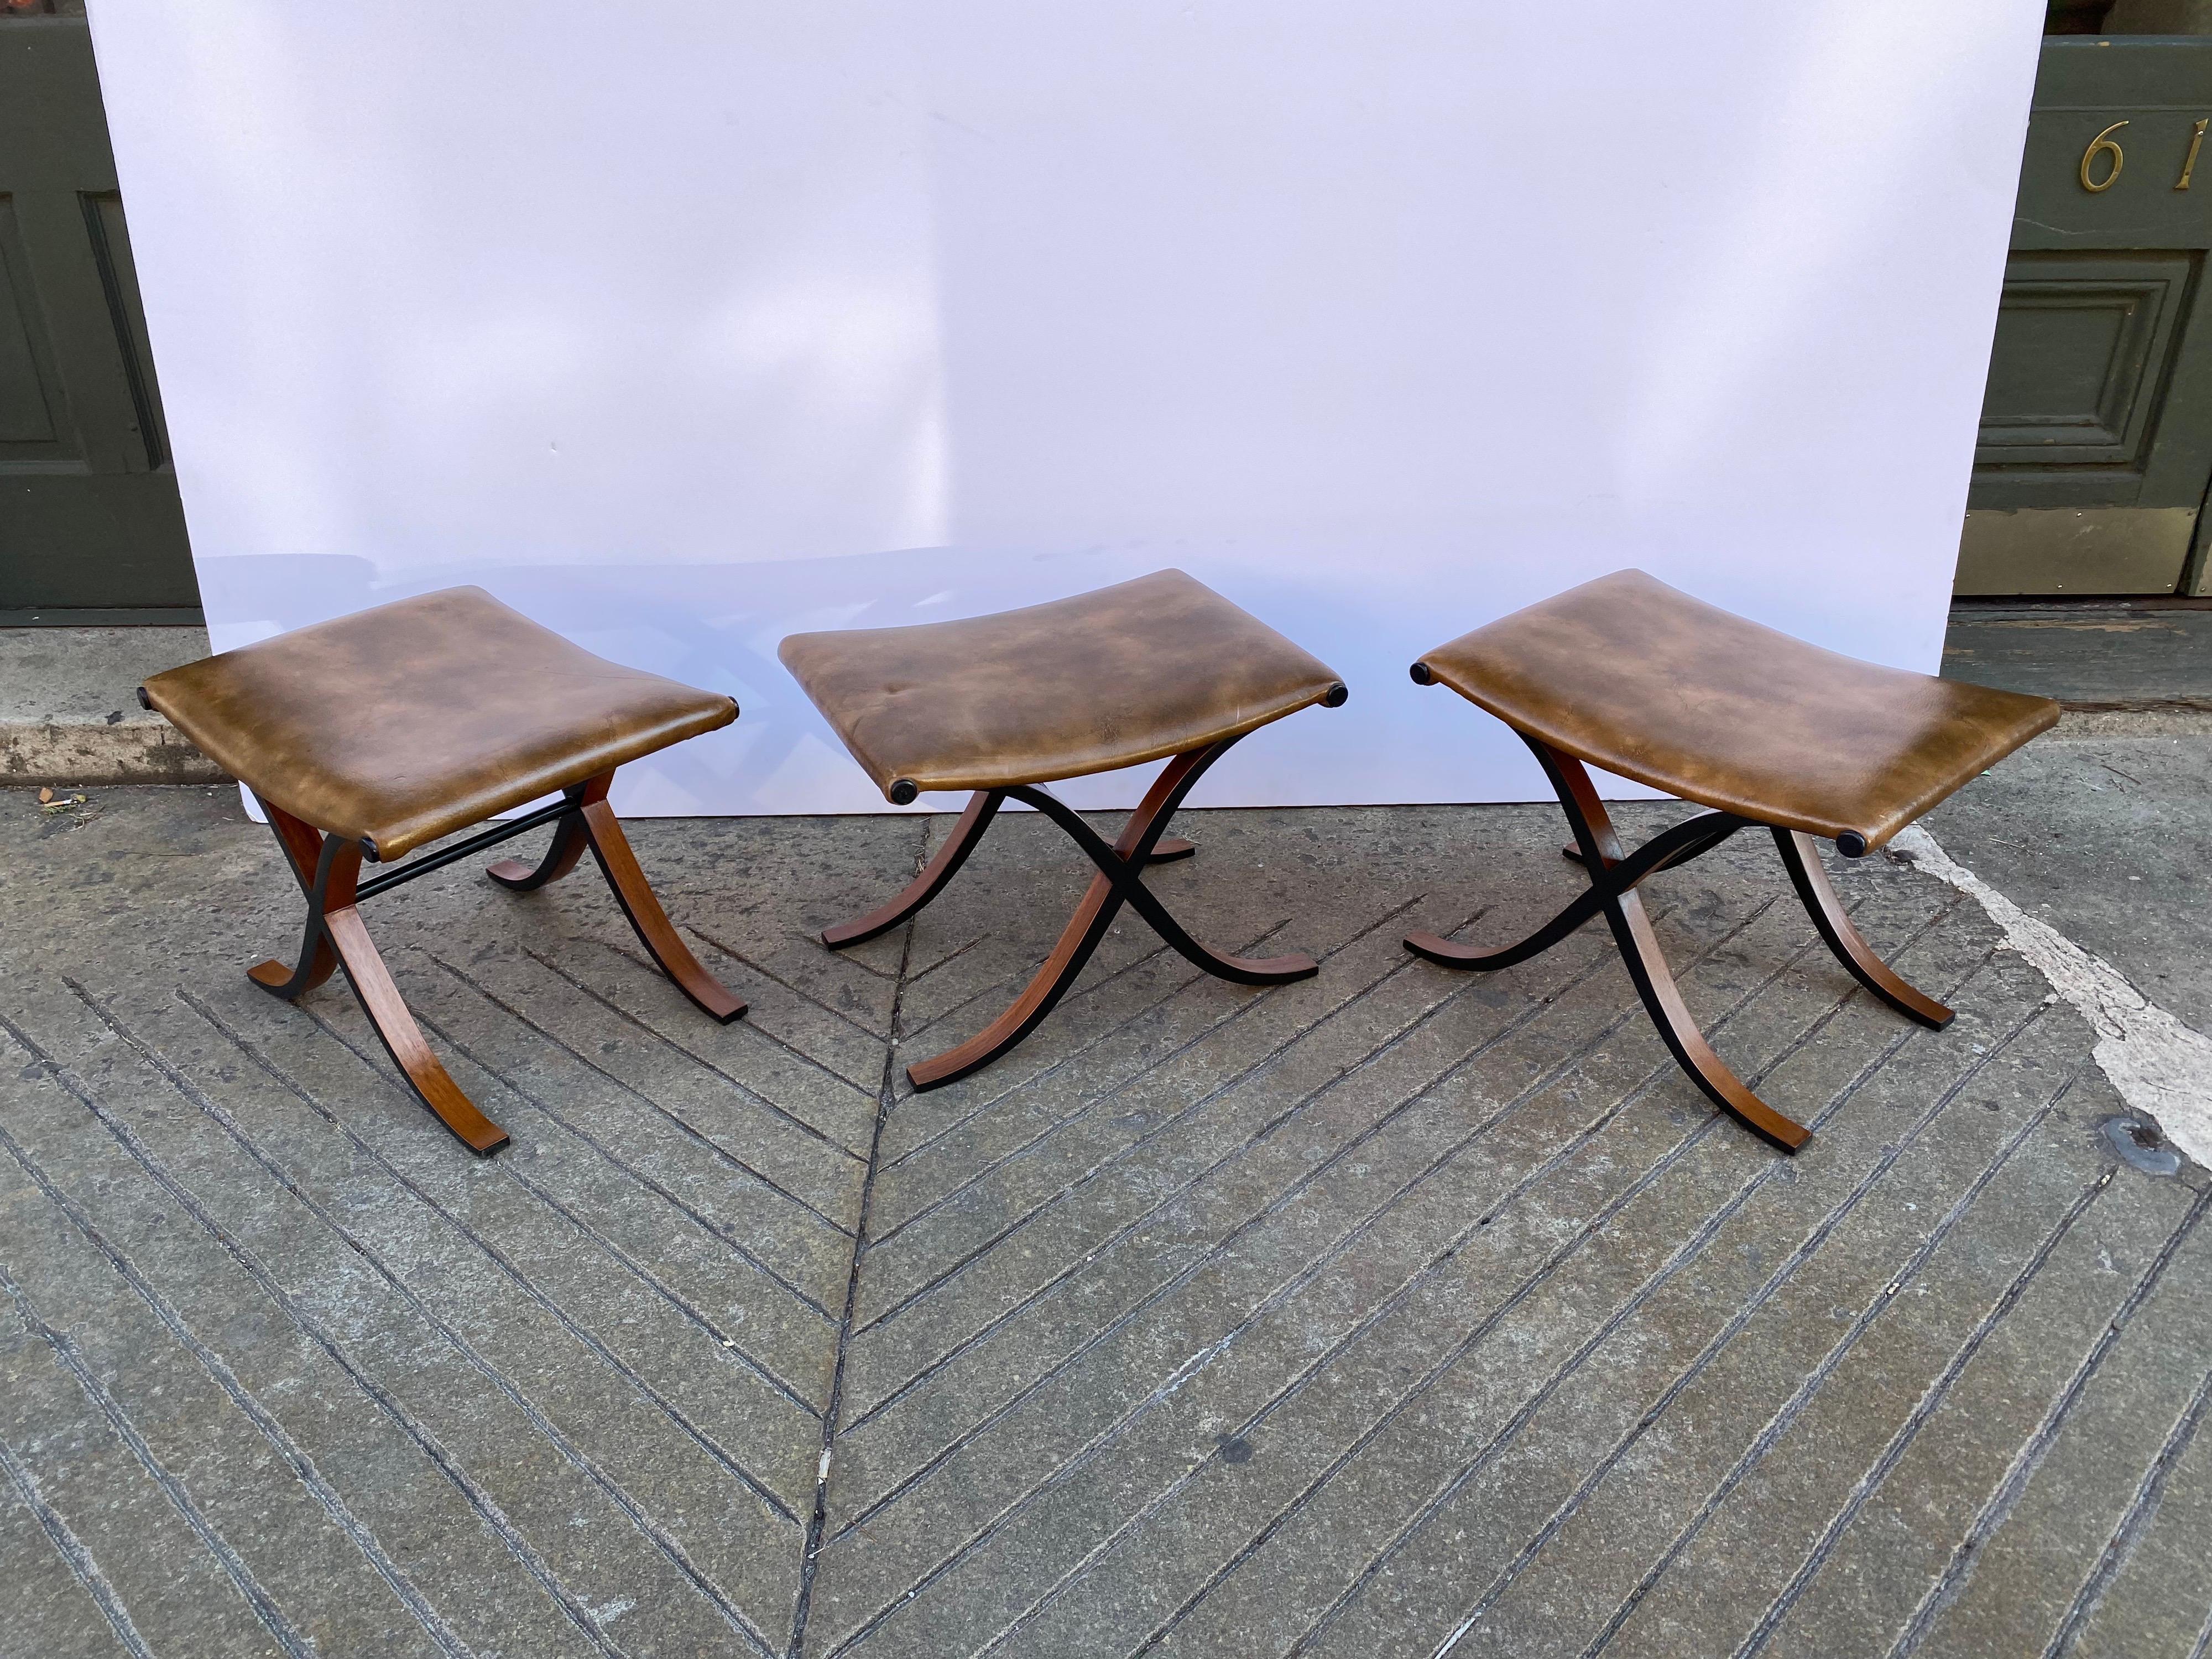 Set of 3 molded plywood and walnut curule stools or ottomans. Newly refinished frames with their original Brown vinyl Covers. Classic Roman Form reinvented in a Modern Fashion. Very solid and elegant!